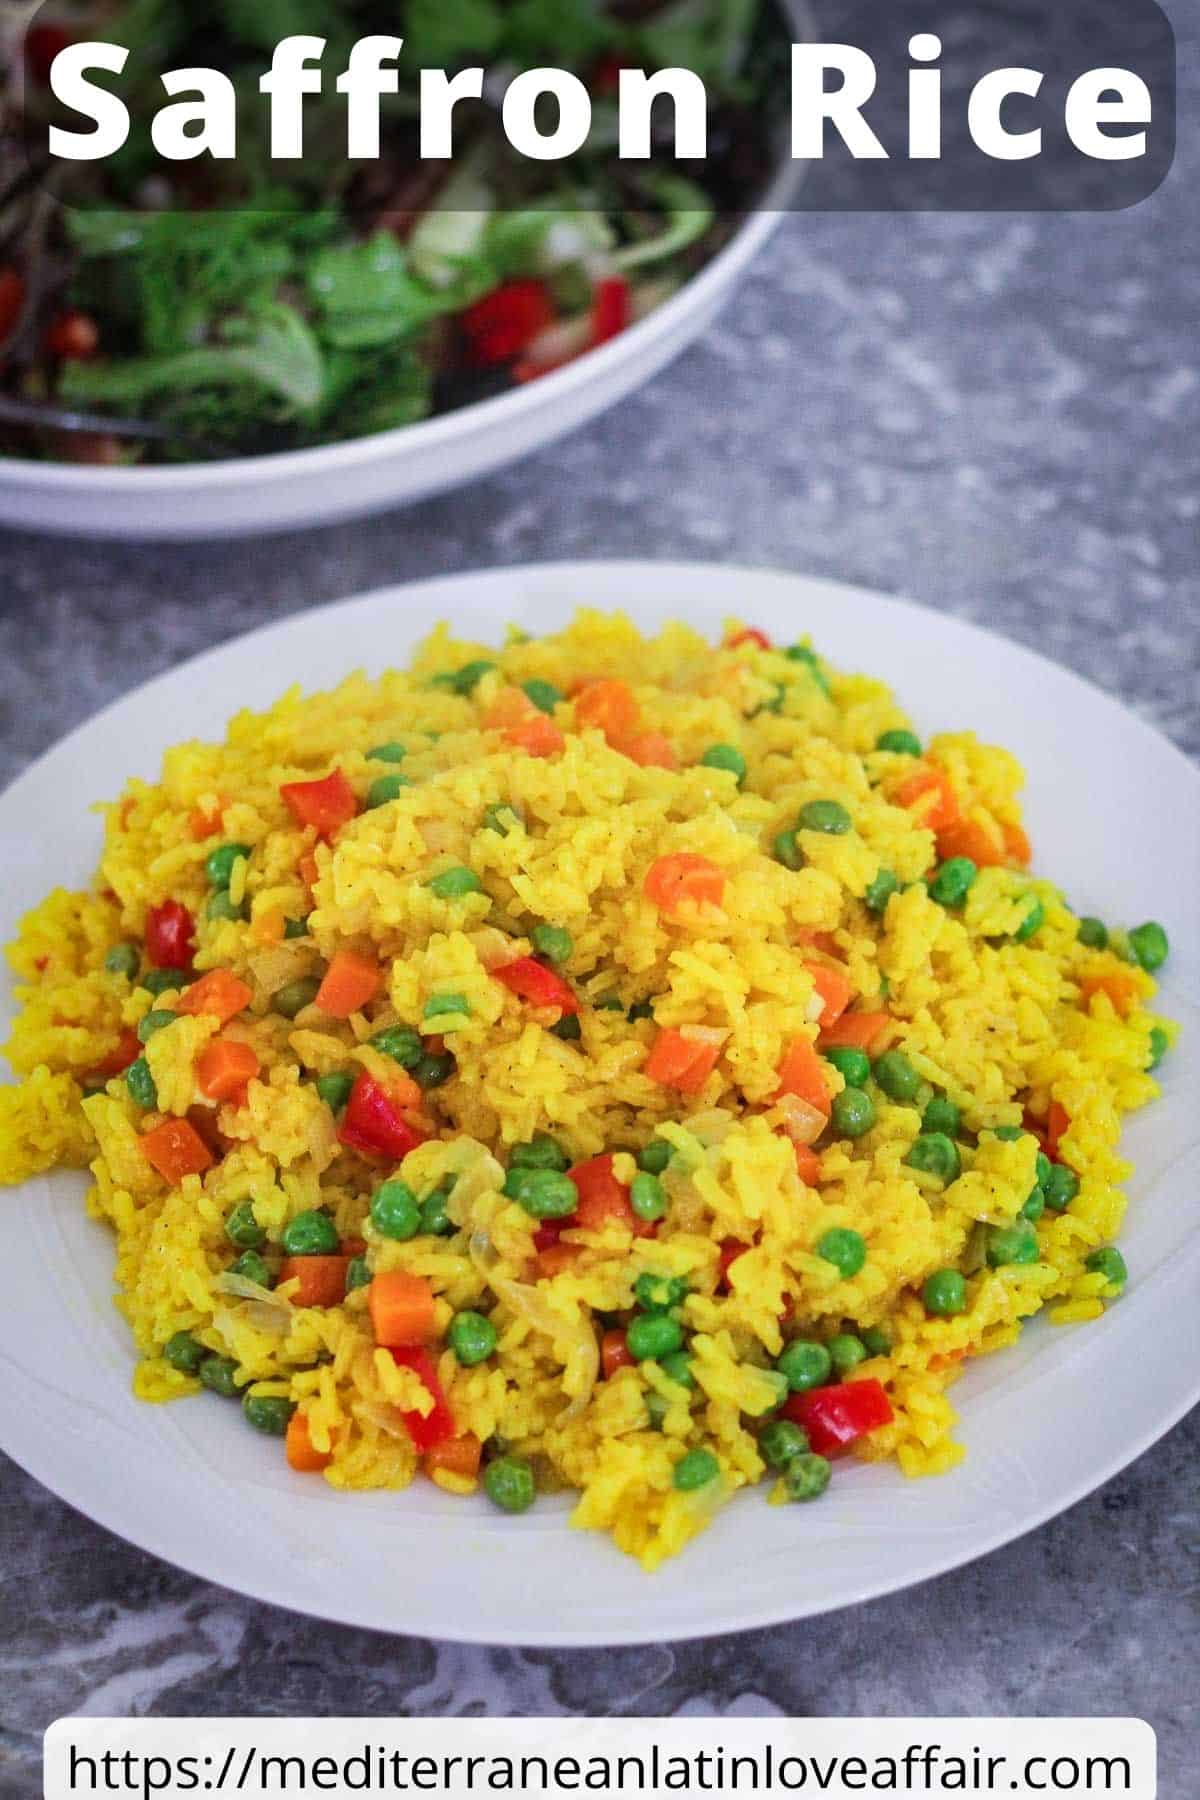 An image prepared for Pinterest. It shows a white round plate, full of saffron rice and veggies. There's a title bar on top and a website link at the bottom. In the background, you can see a plate of salad.